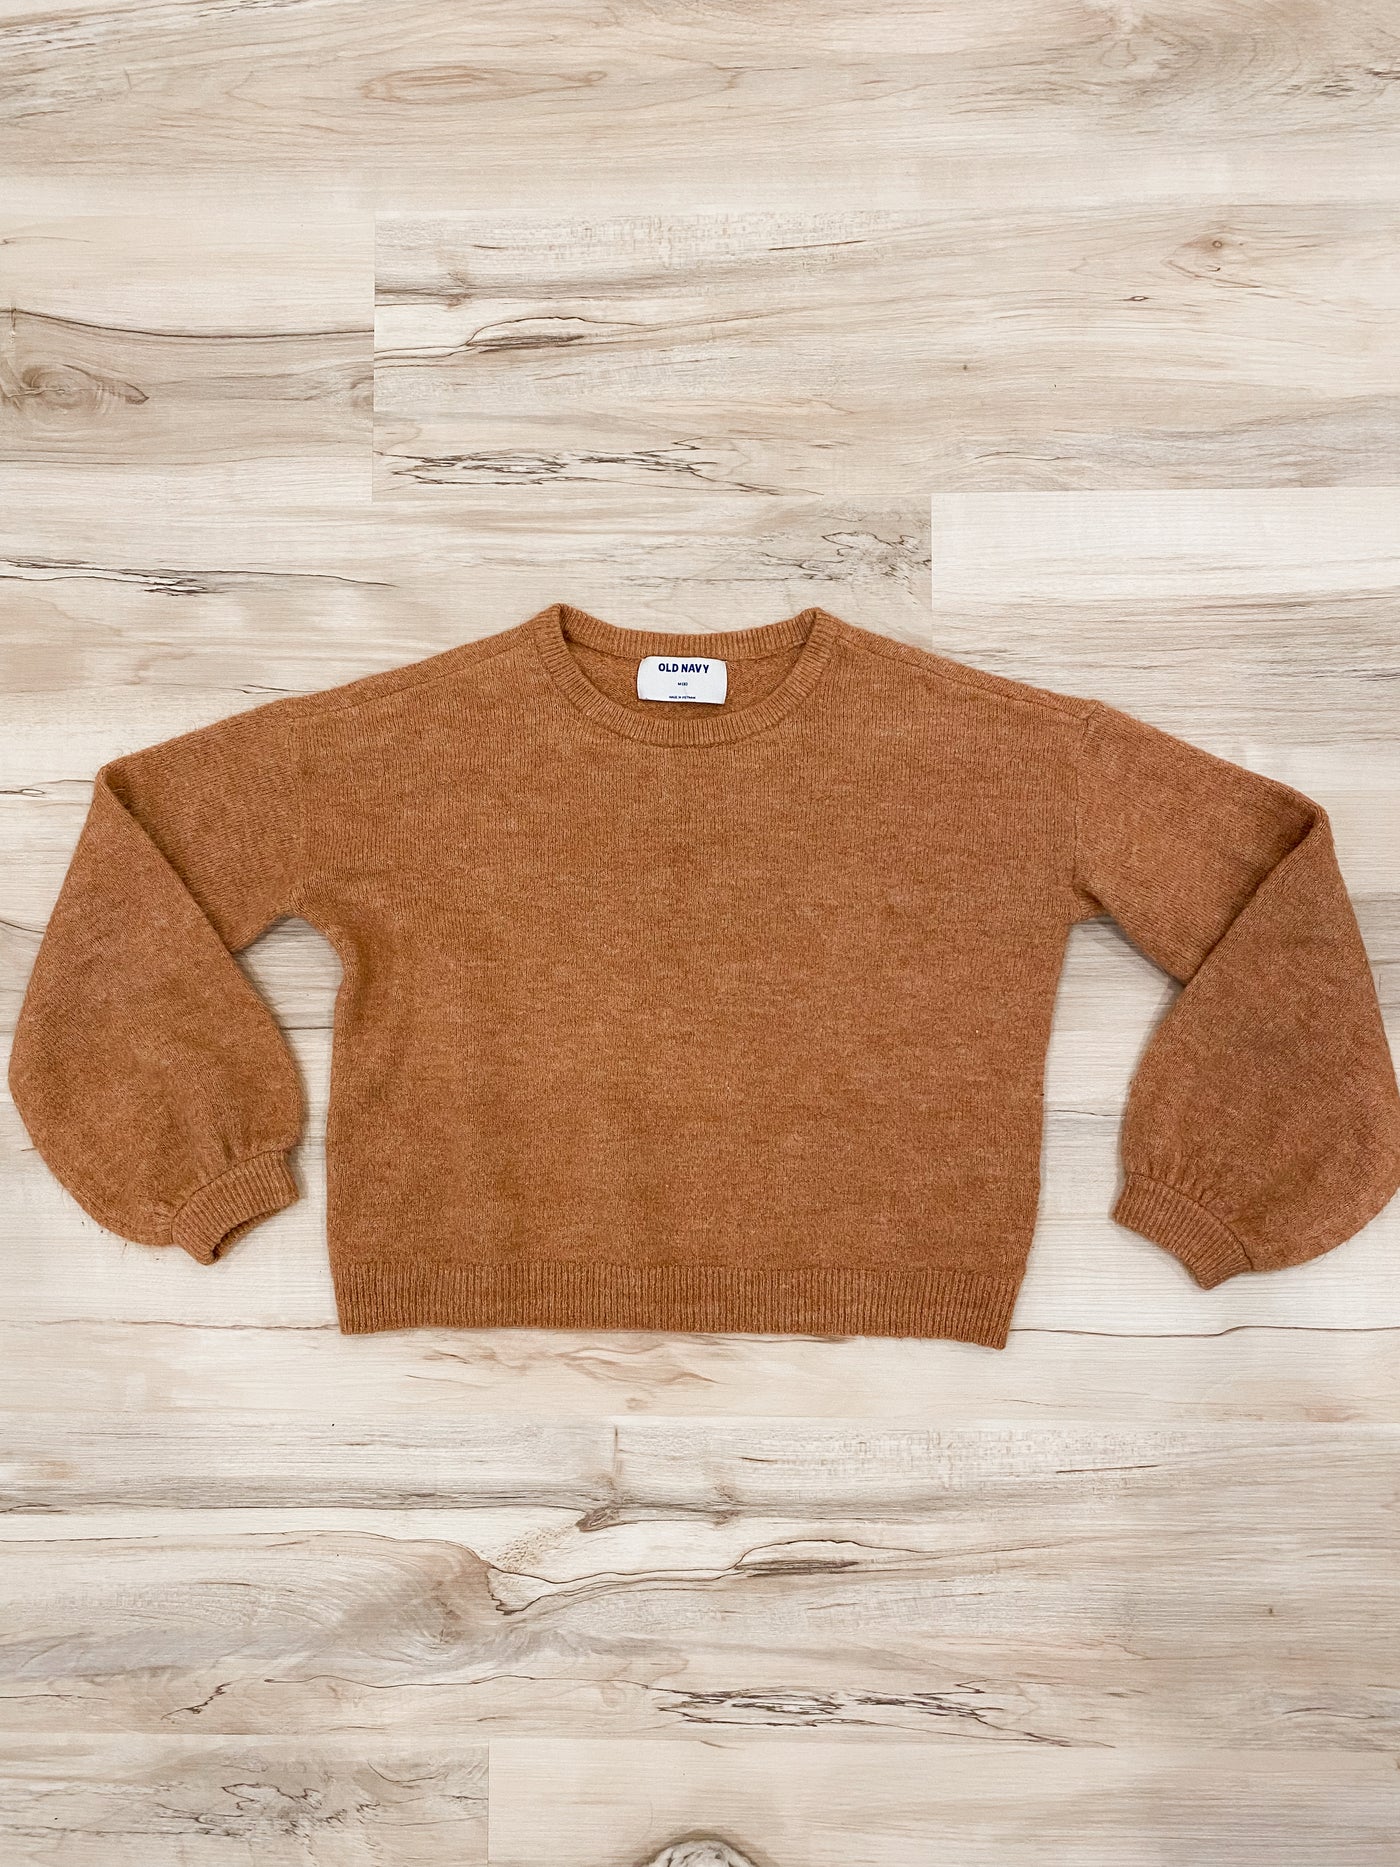 Girls Brown Knit Pullover